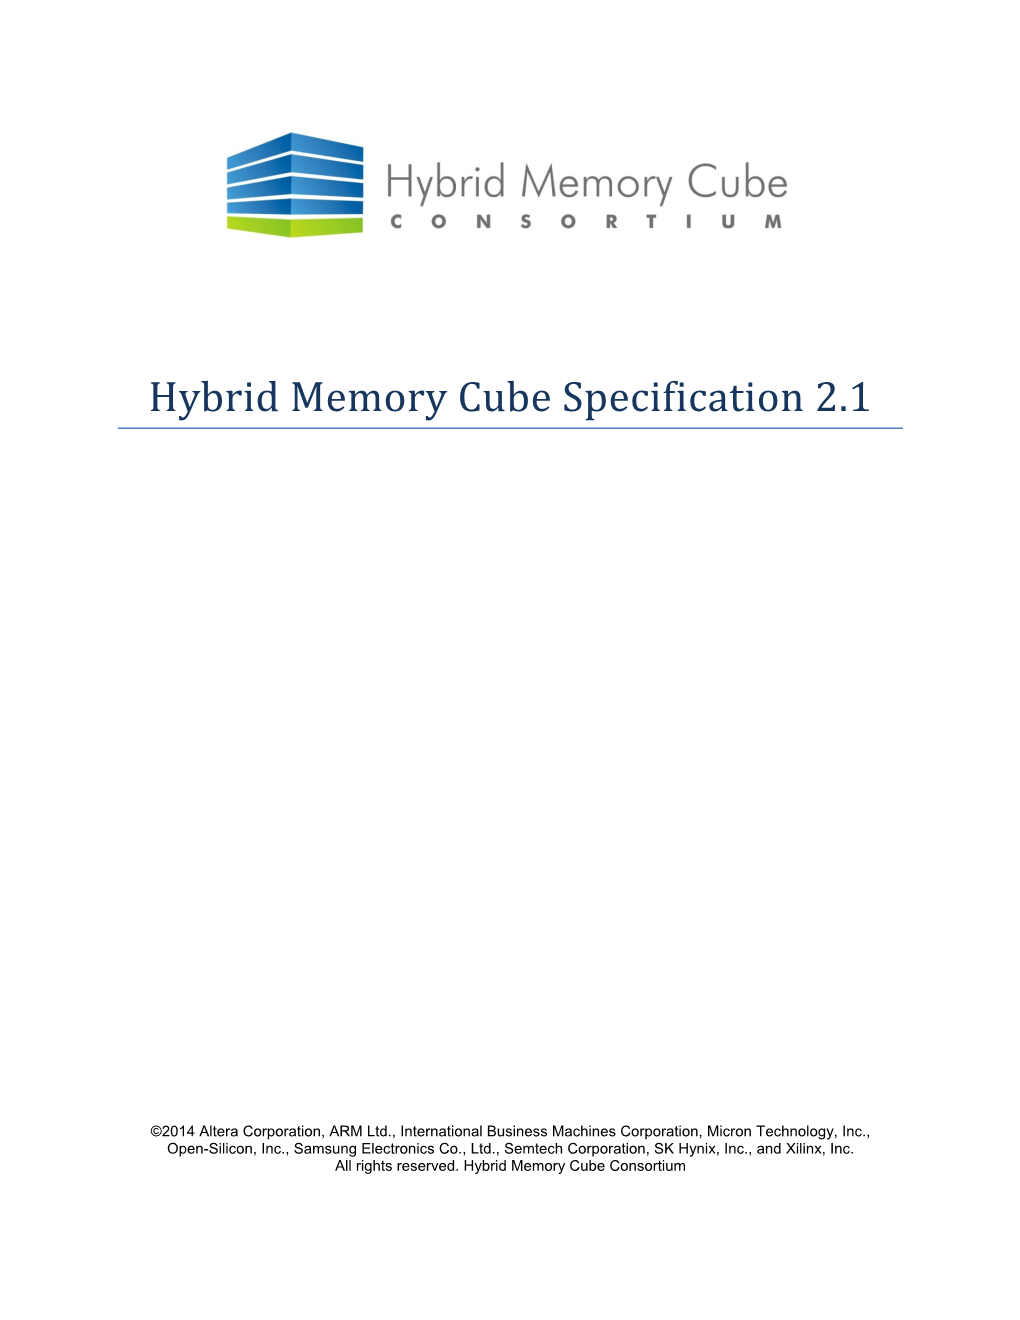 Hybrid Memory Cube Specification 2.1